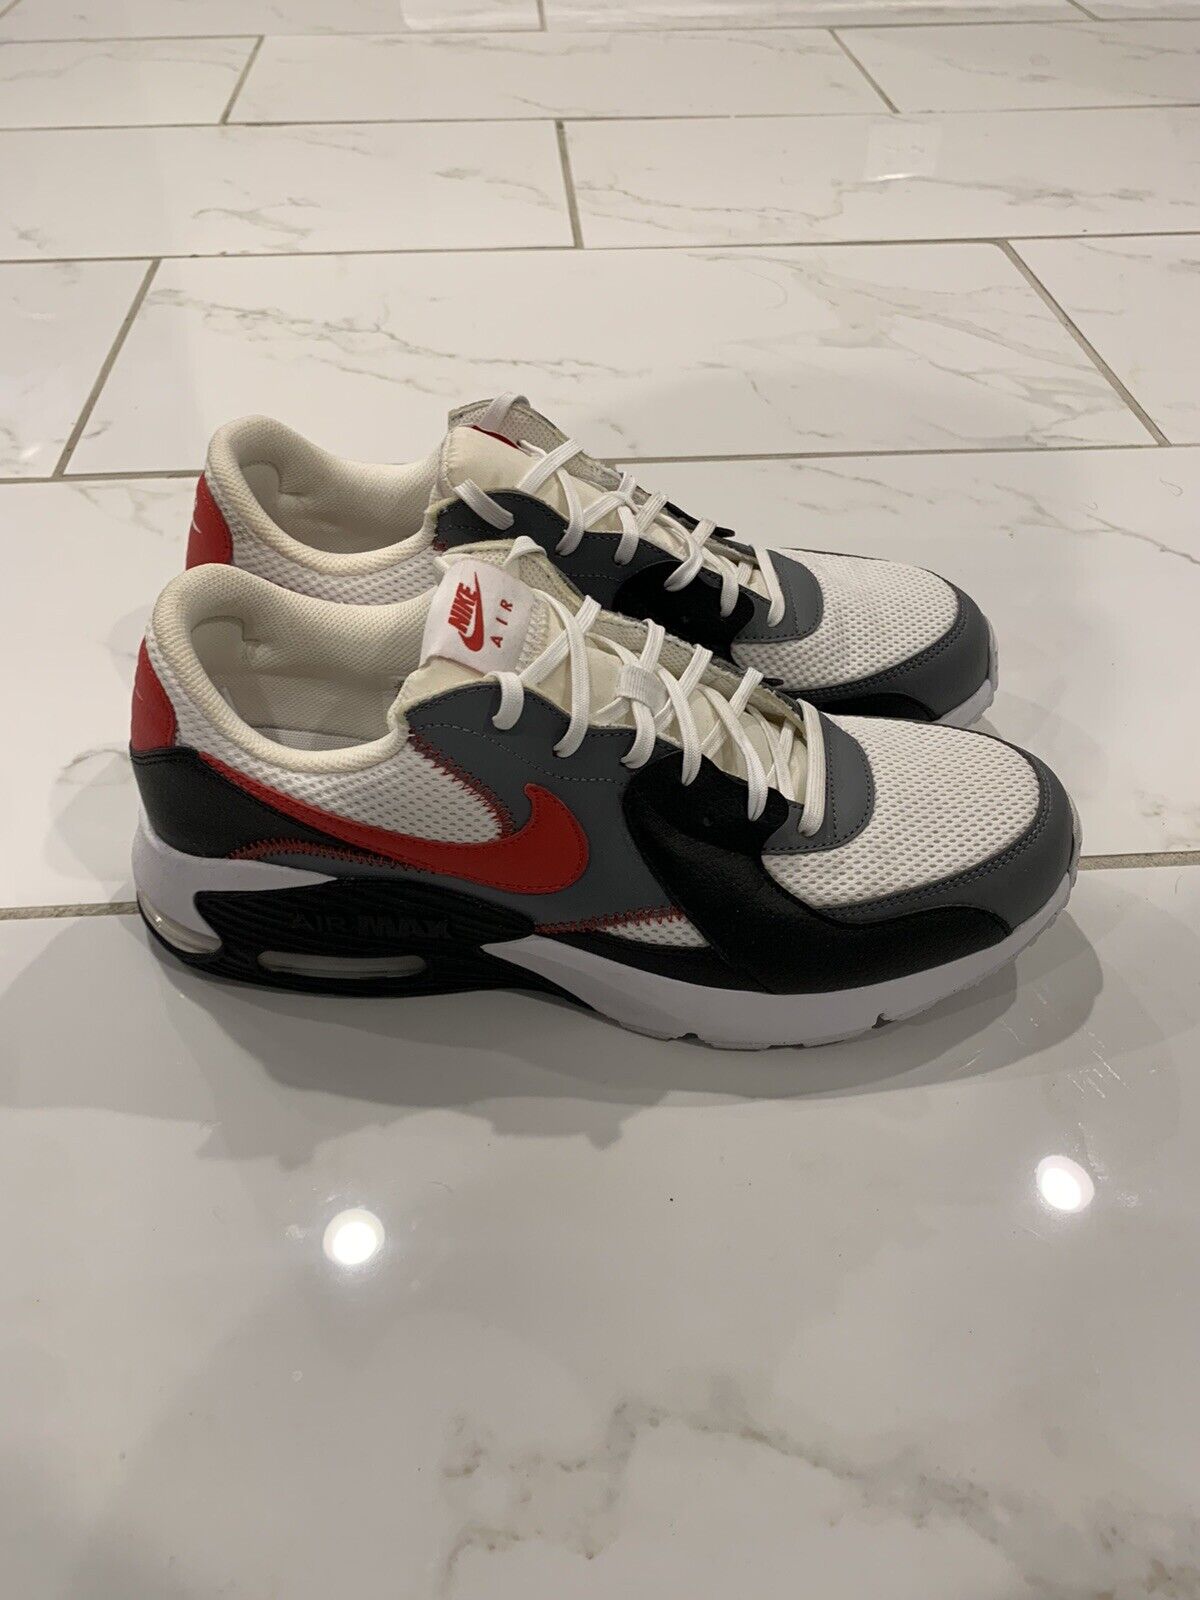 Nike air max white grey and red - image 1